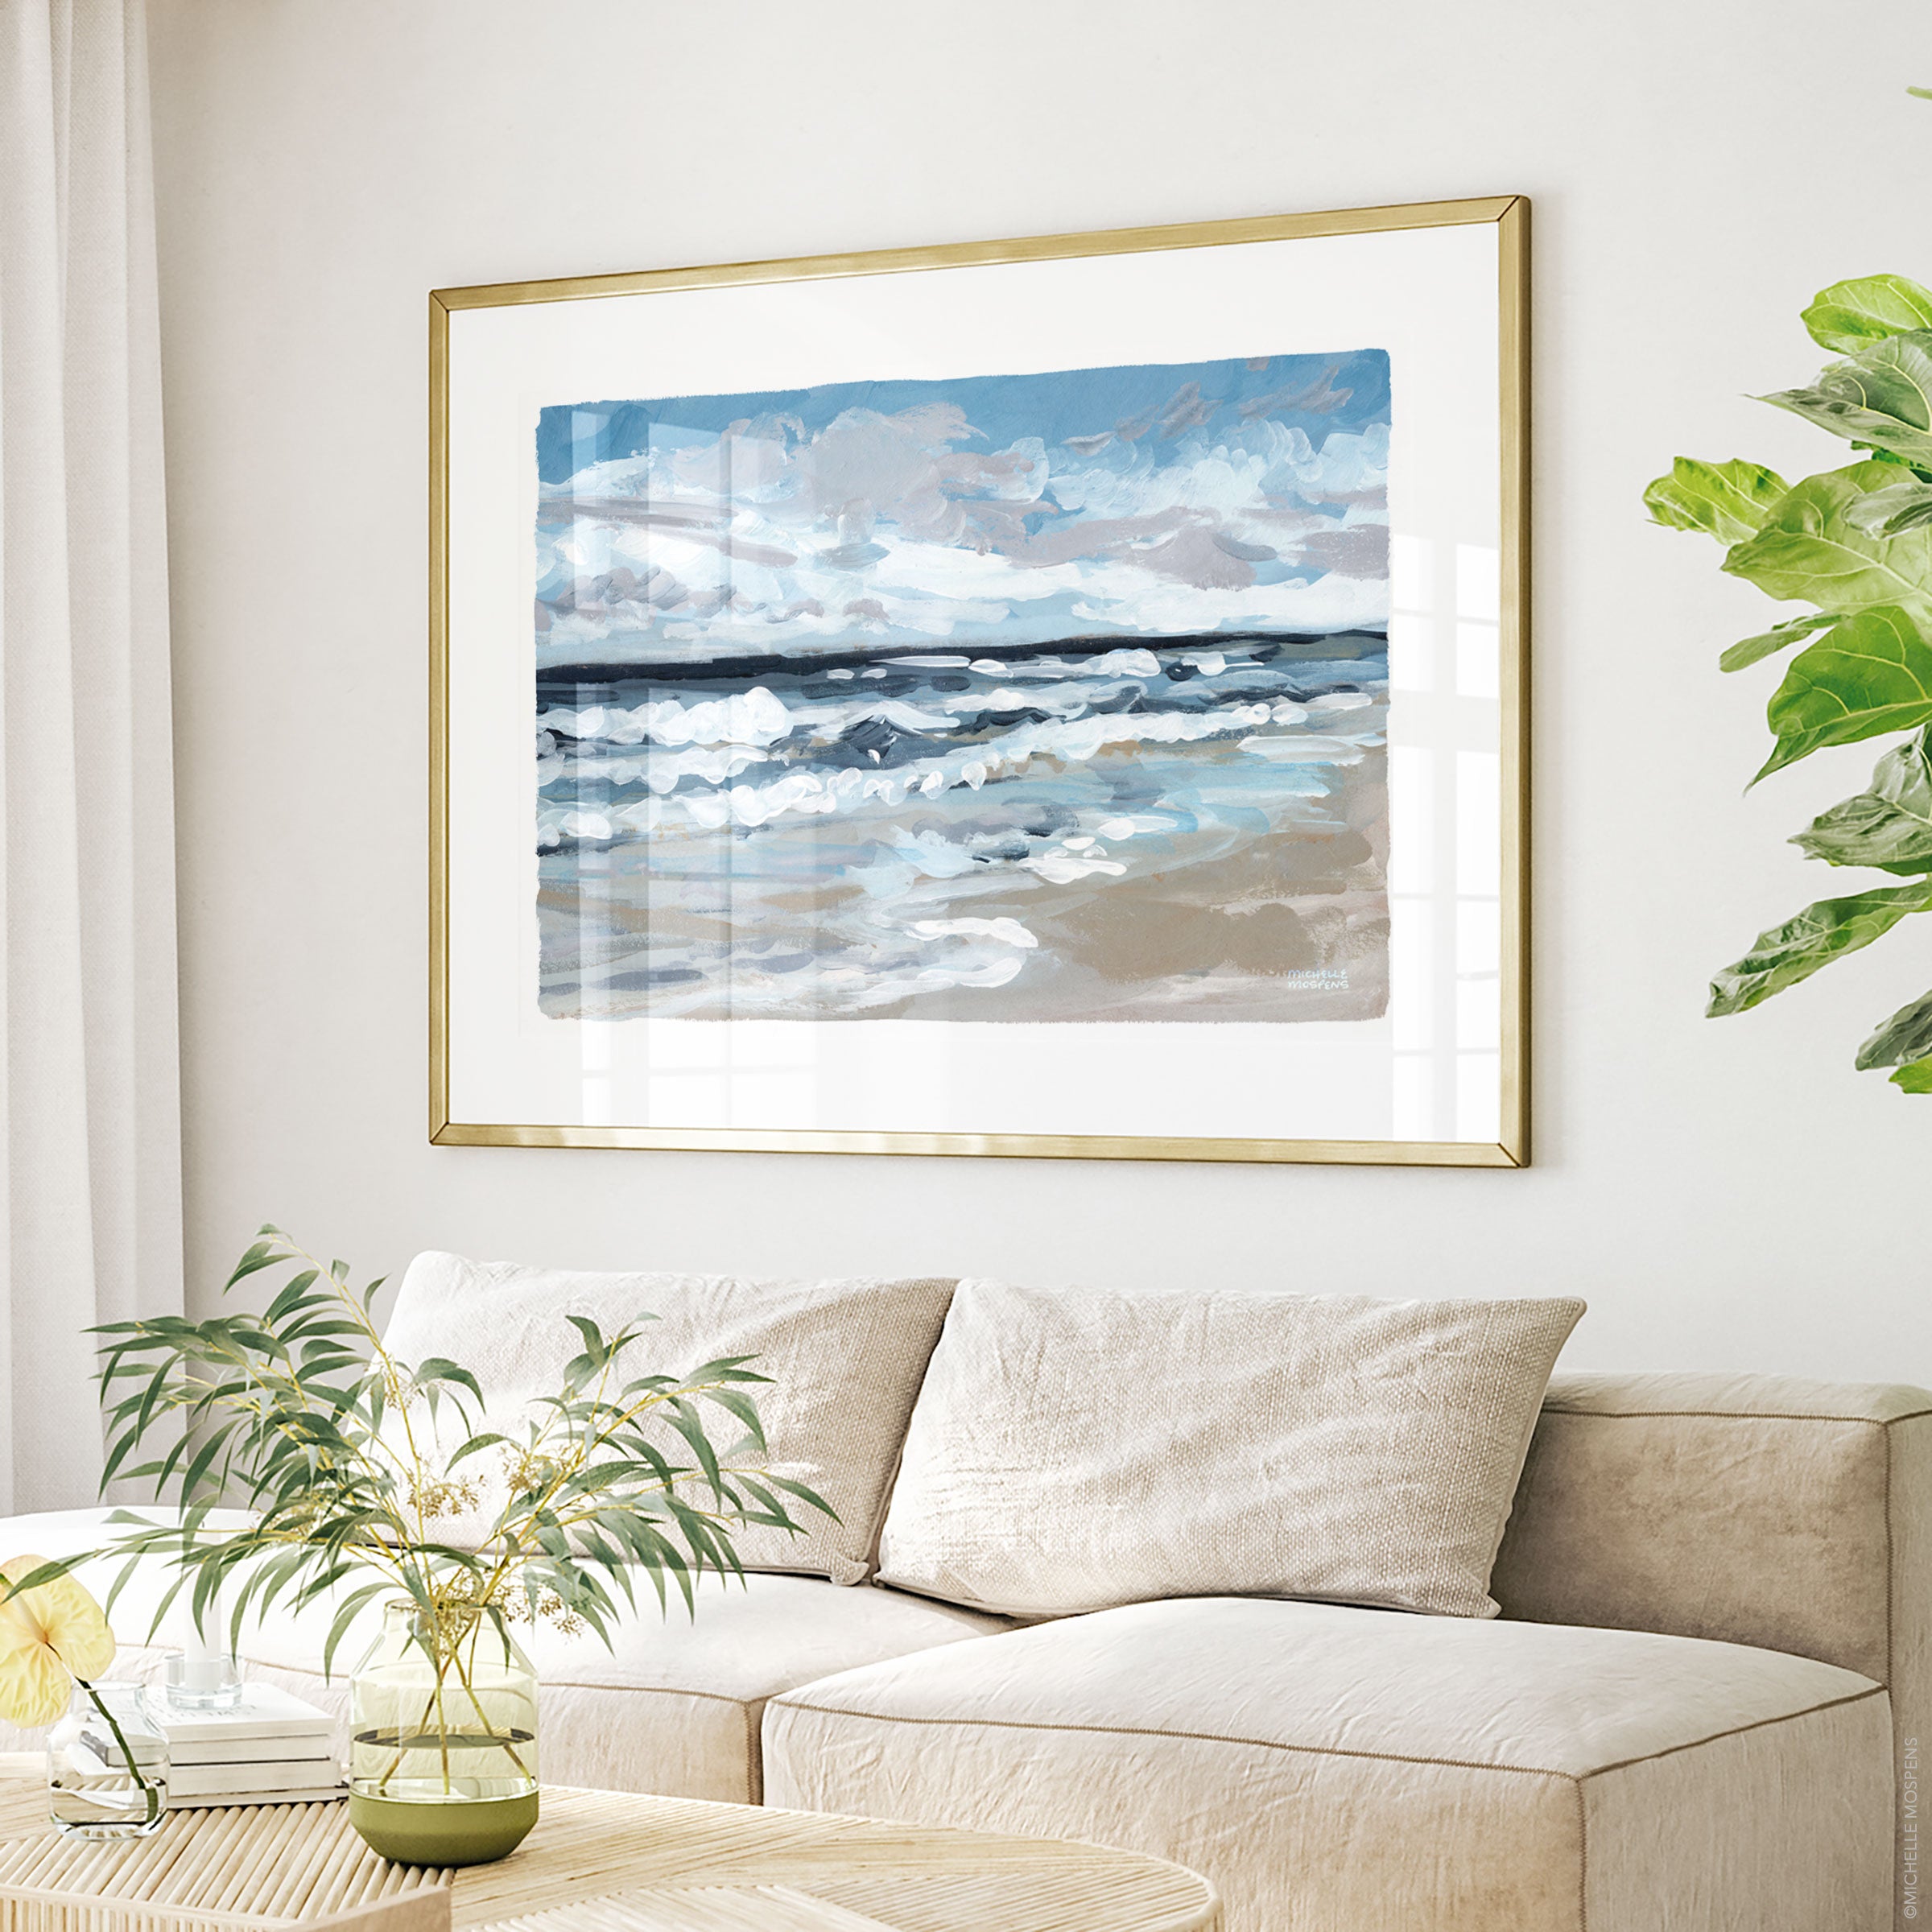 Tranquil Tides Beach Ocean Seascape Painting Wall Art Print by Michelle Mospens